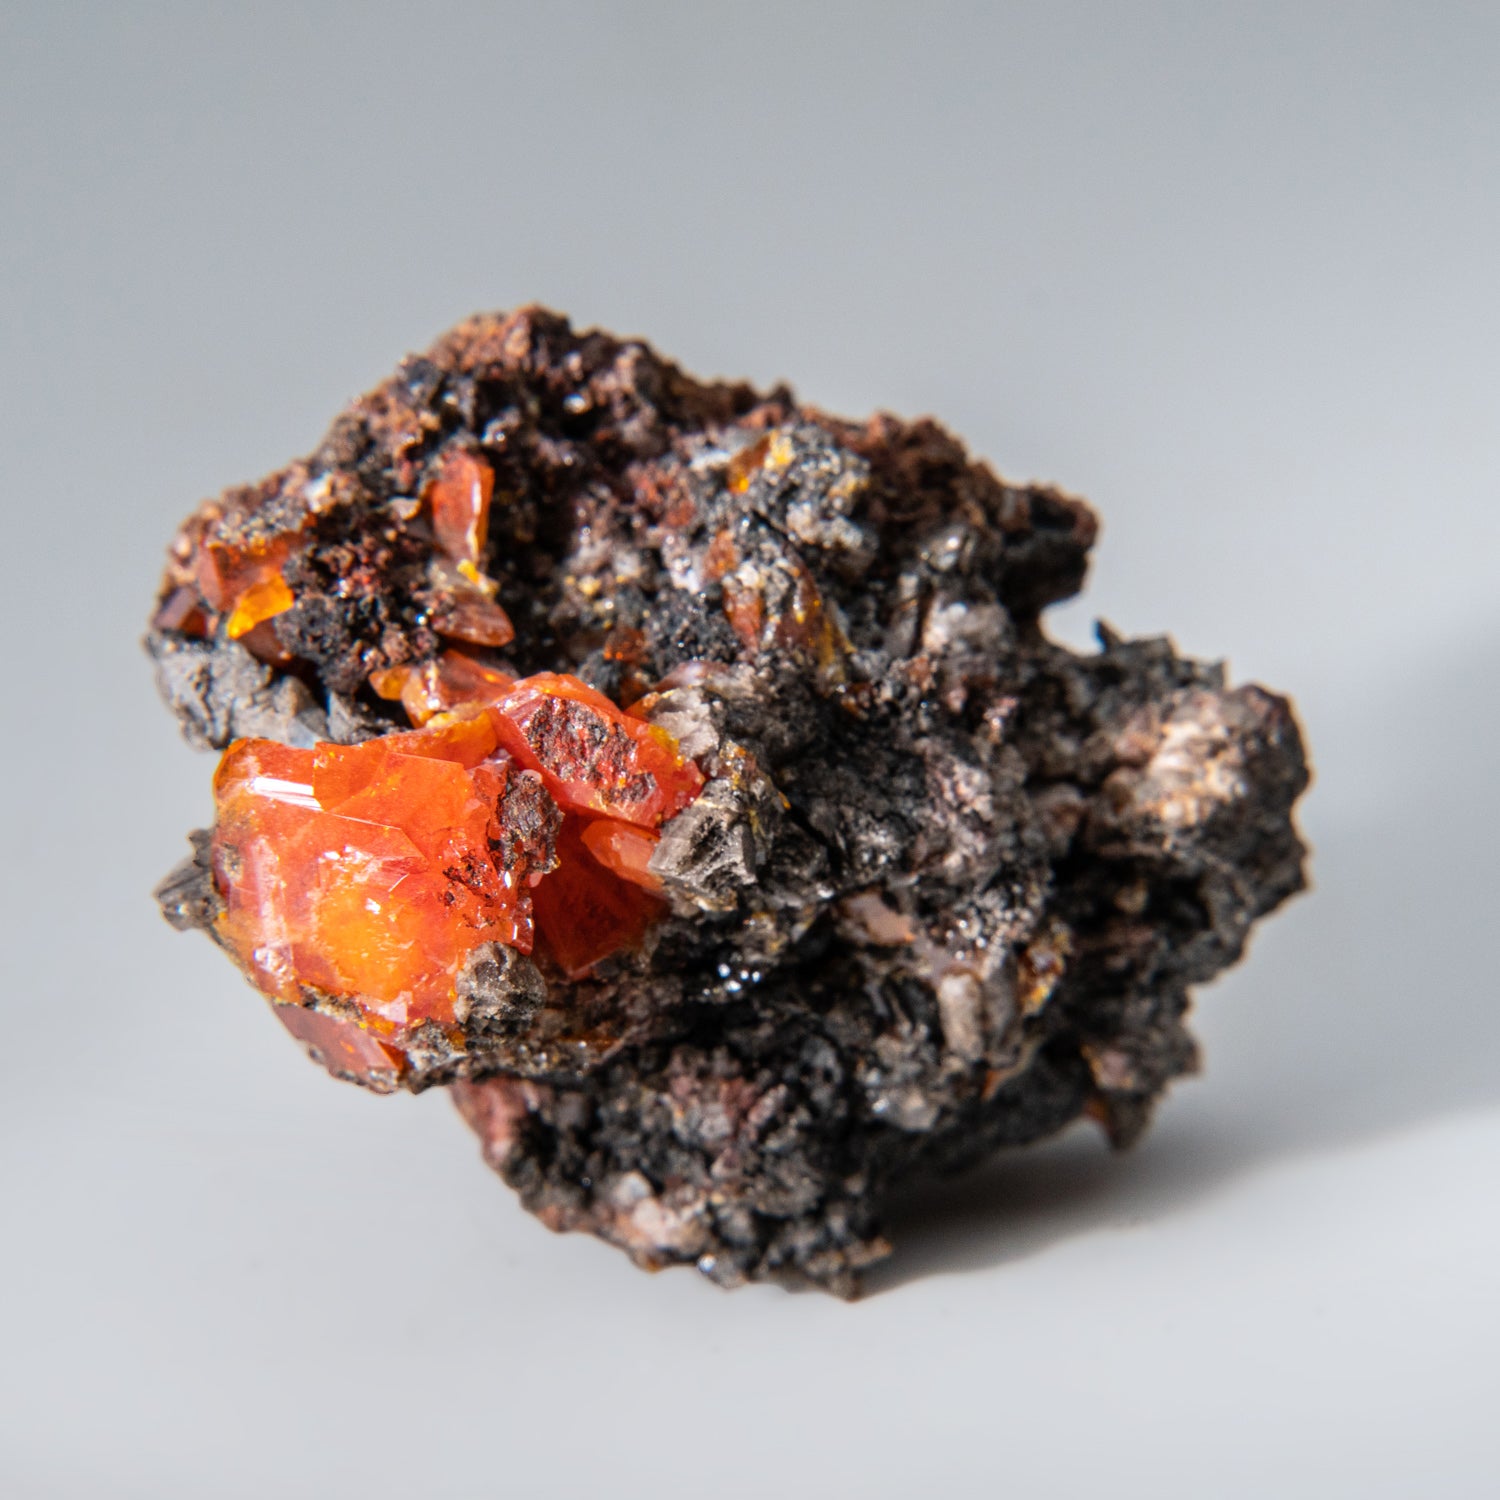 Wulfenite from Maoniuping Mine, Liangshan Autonomous Prefecture, Sichuan Province, China